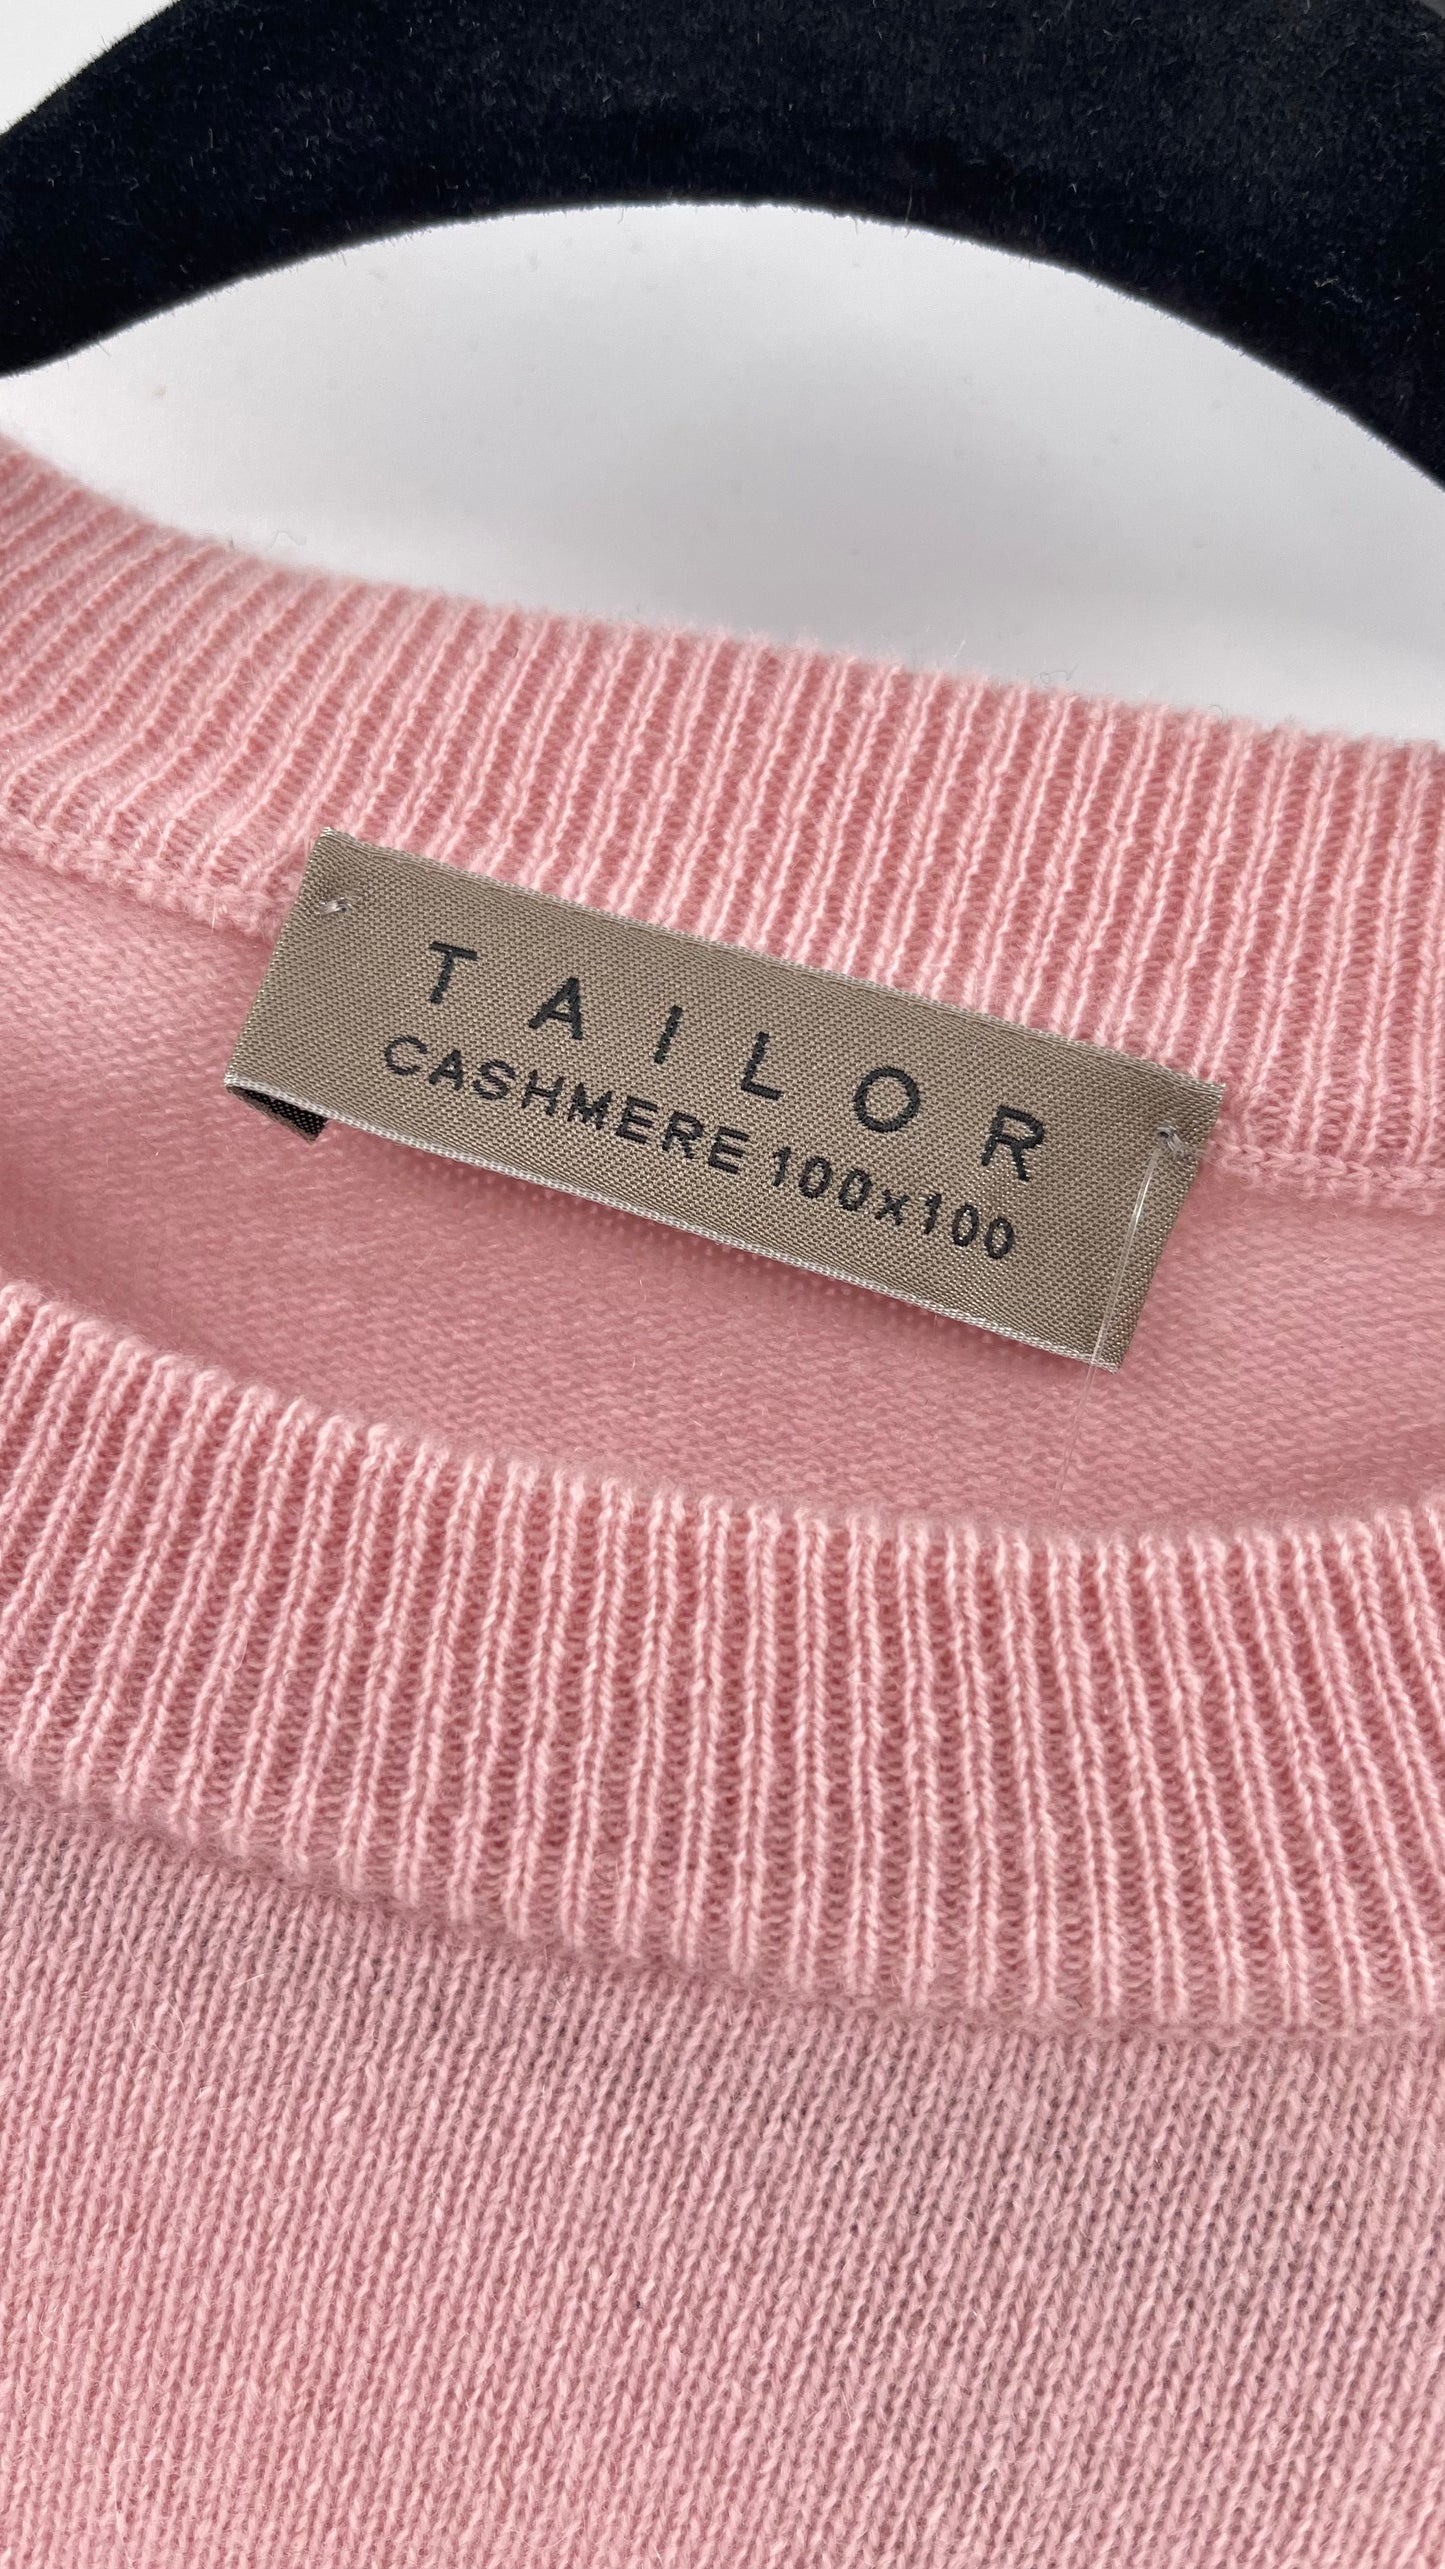 TAILOR Pink Cashmere 100x100 (Large)